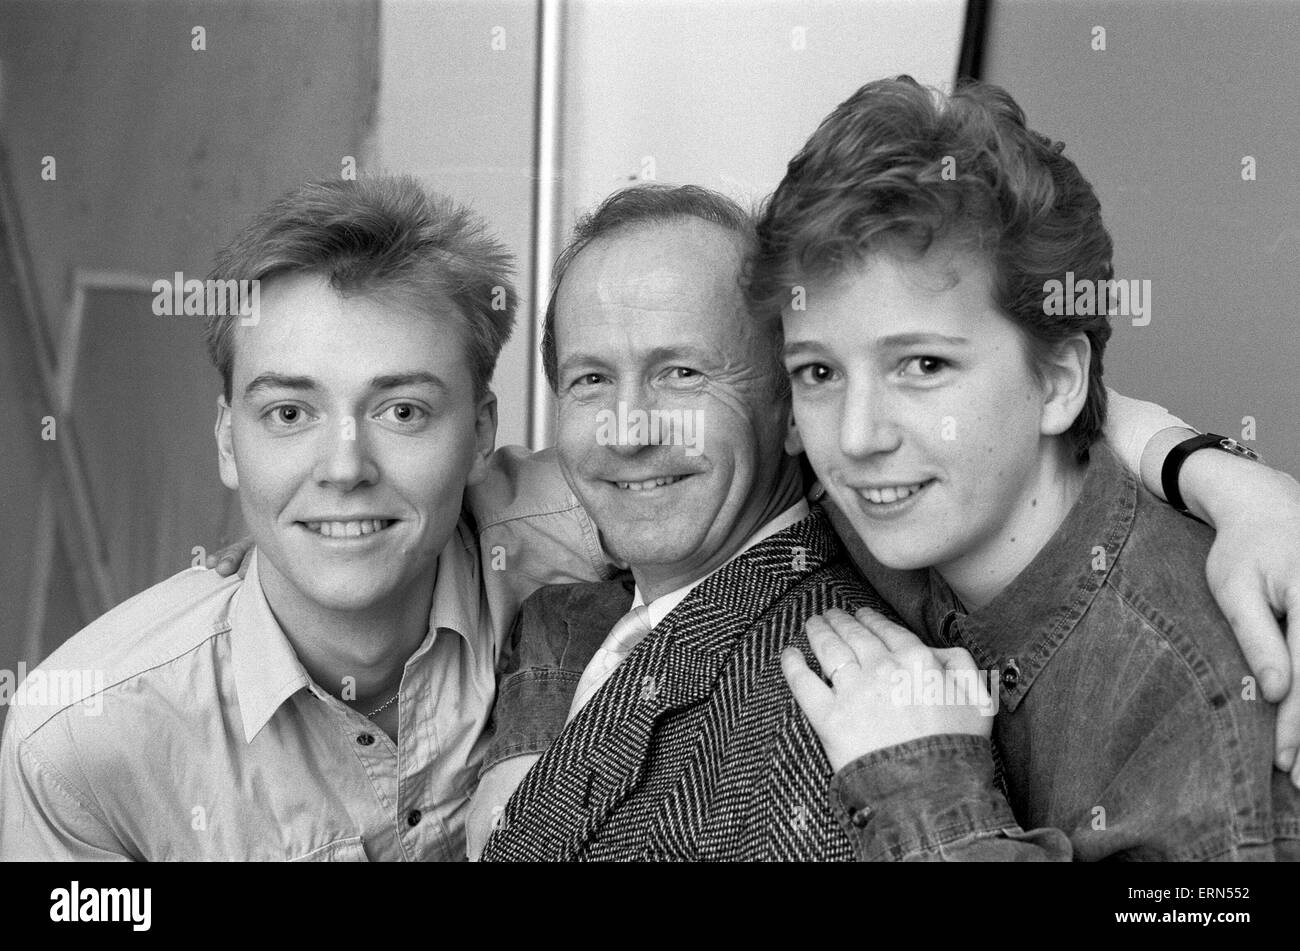 BRMB Breakfast team, Simon Davies and Deborah Kinch joining BRMB, programme controller Mike Owen in the centre, Birmingham, 6th March 1989 Stock Photo